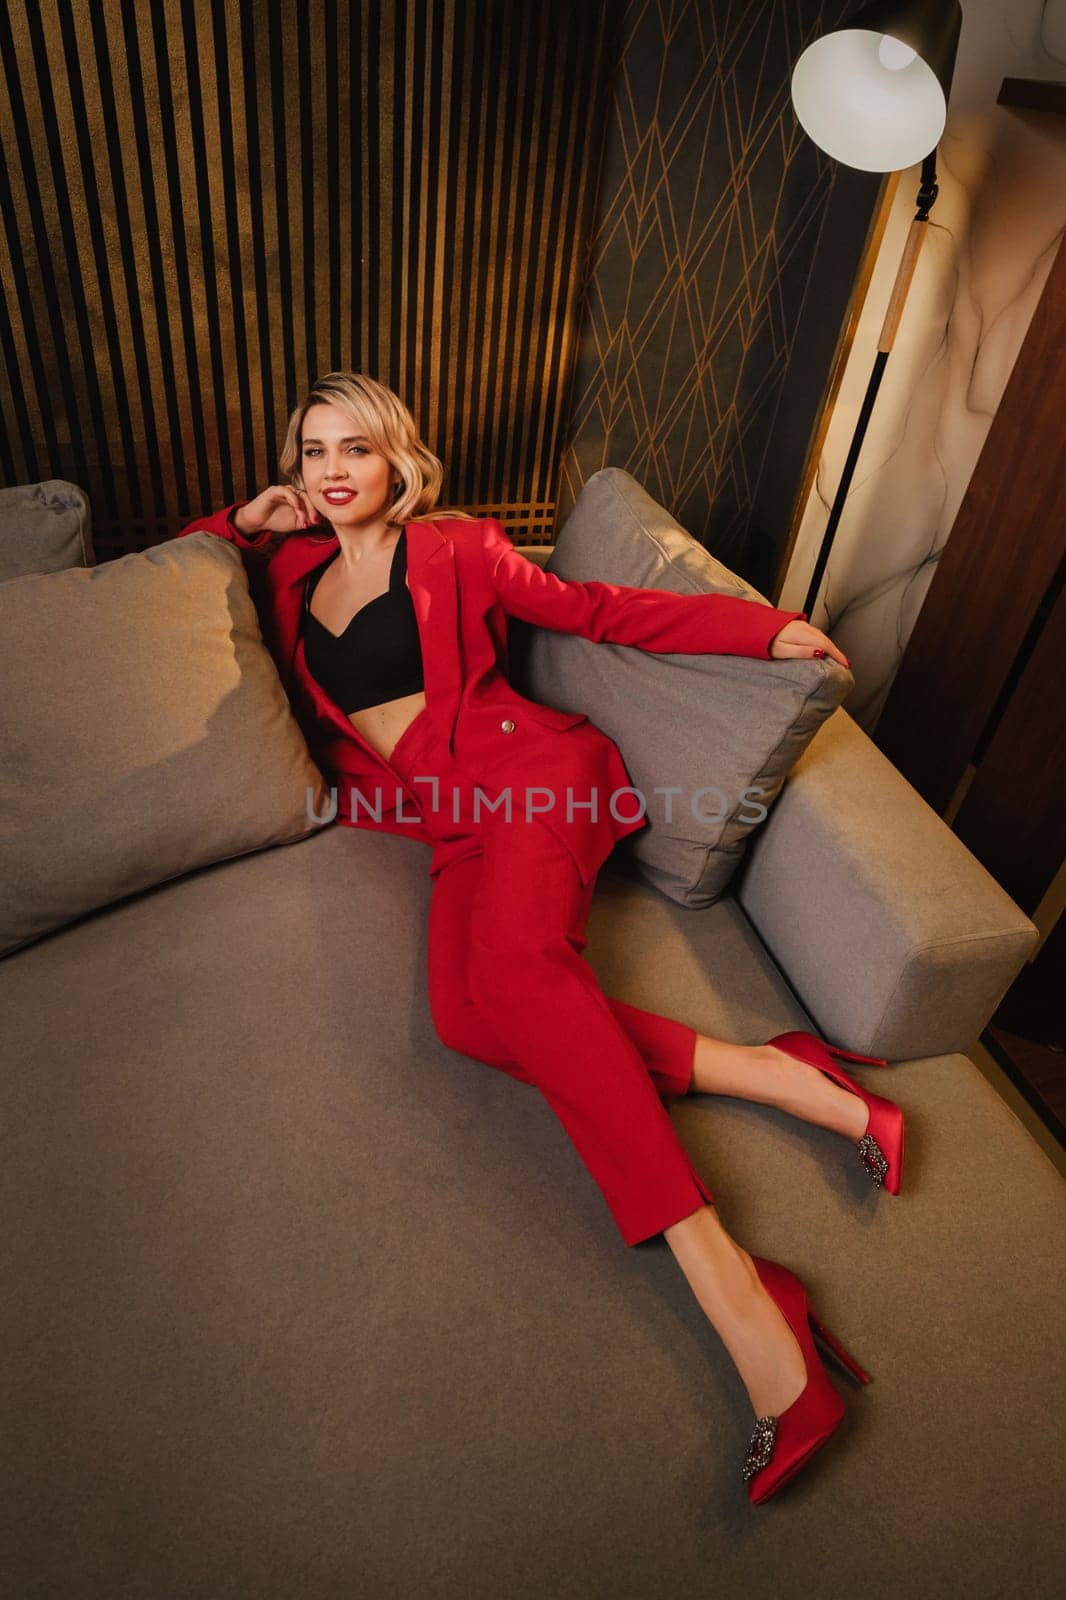 a beautiful girl dressed in a red formal suit posing in a modern interior.